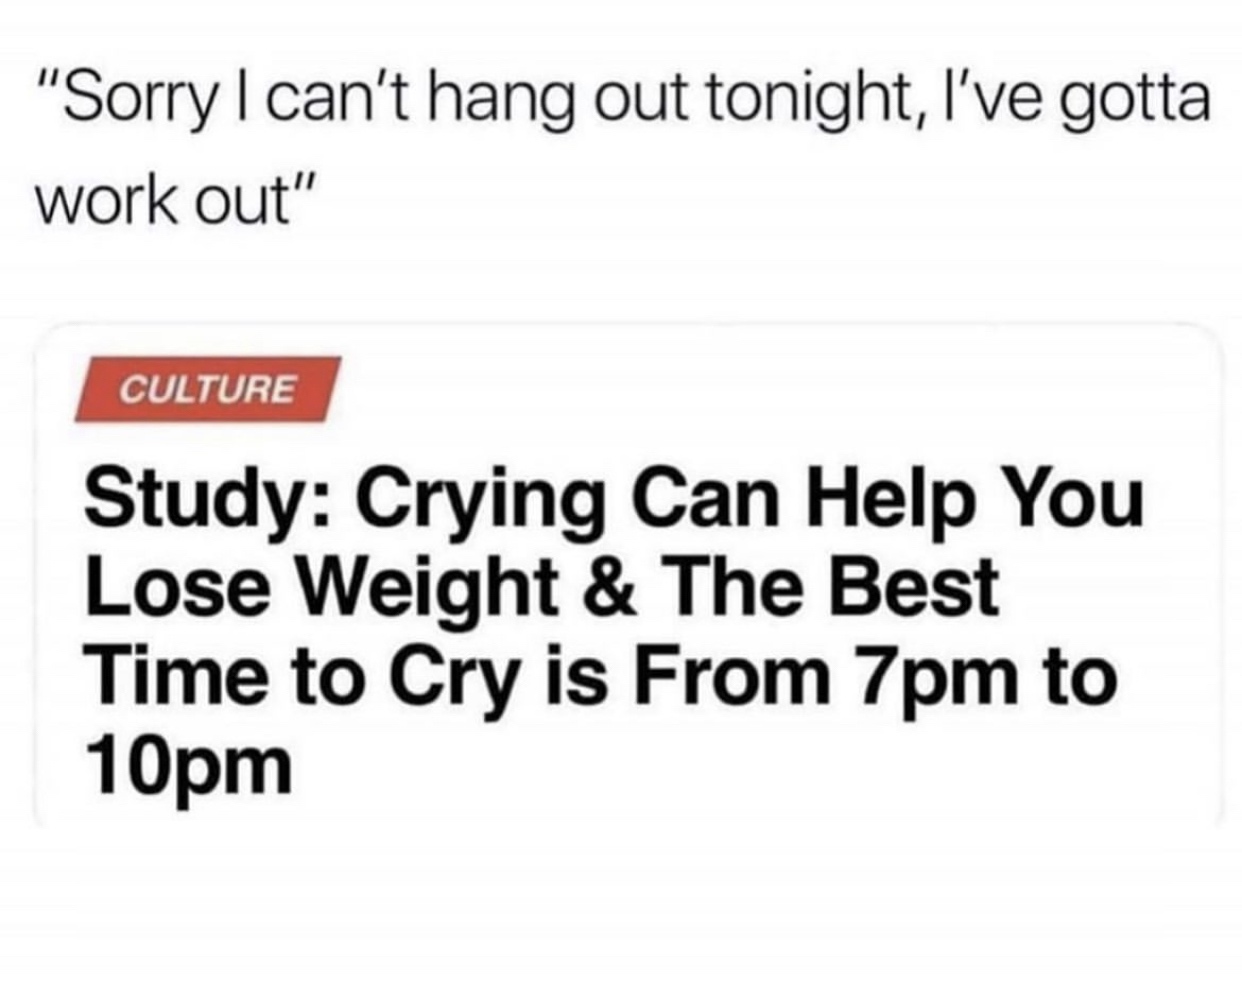 organization - "Sorry I can't hang out tonight, I've gotta work out" Culture Study Crying Can Help You Lose Weight & The Best Time to Cry is From 7pm to 10pm